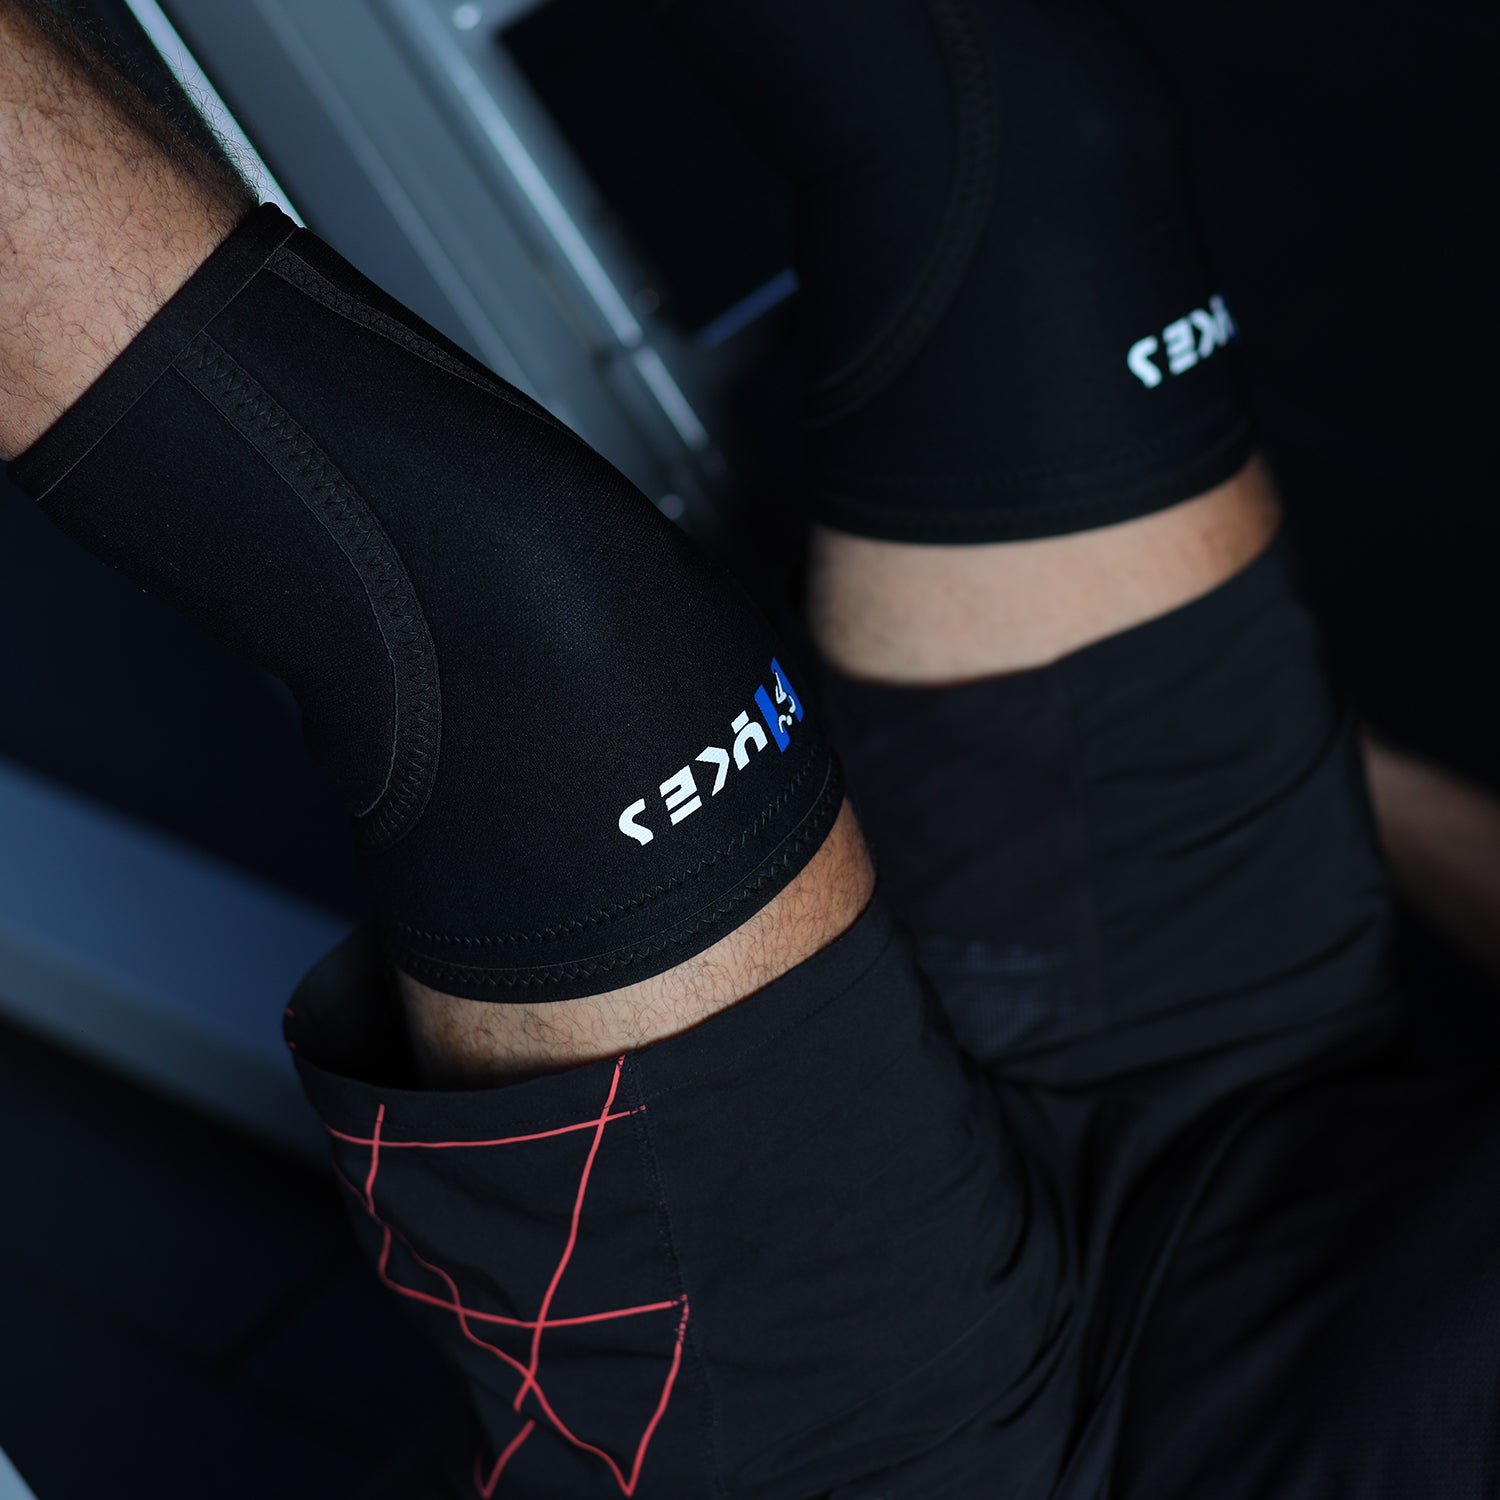 Joyfit Calf Compression Sleeves for Running, Gym, Fitness Workouts & Pain  Relief-Premium Knee Support - Buy Joyfit Calf Compression Sleeves for  Running, Gym, Fitness Workouts & Pain Relief-Premium Knee Support Online at